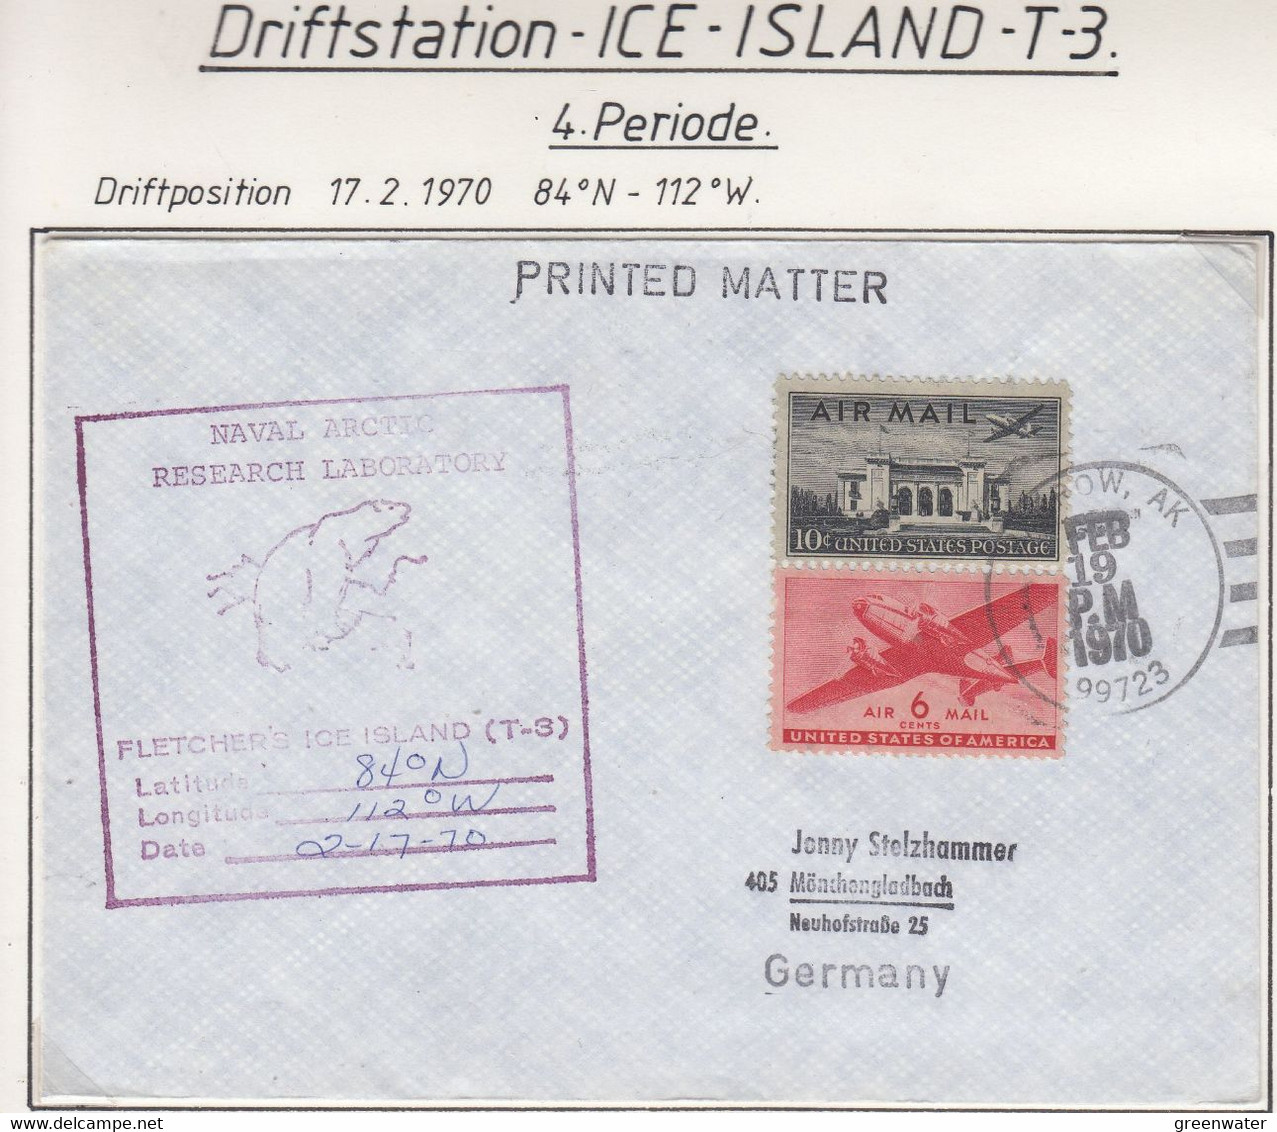 USA Driftstation ICE-ISLAND T-3 Cover Fletcher's Ice Island T-3 Periode 4 Ca FEB 19 1970  (DR134A) - Scientific Stations & Arctic Drifting Stations